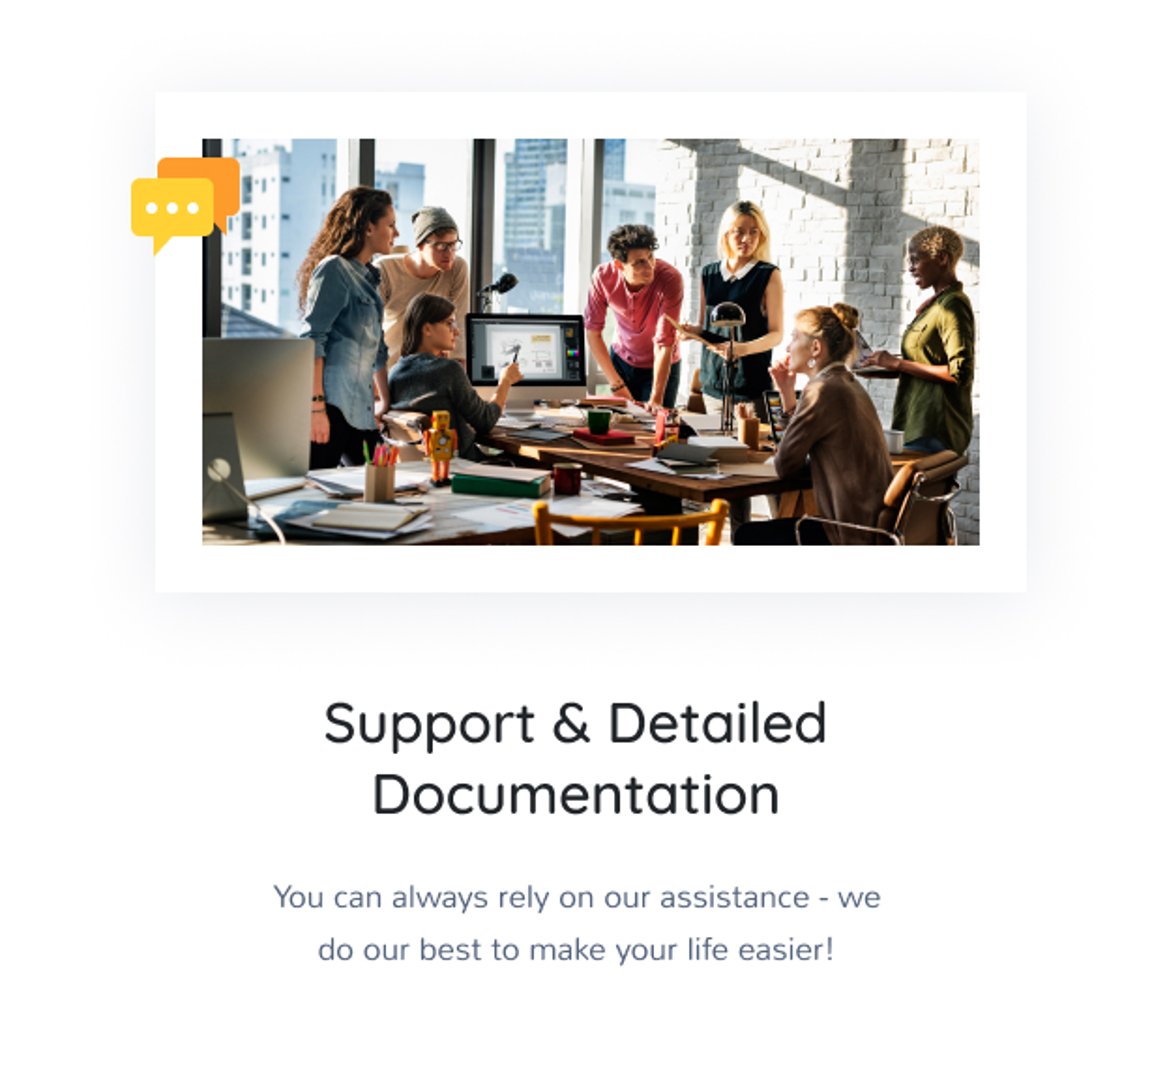 Boldest - Consulting and Marketing Agency WordPress Theme - Support & Detailed Documentation | Cmsmasters studio